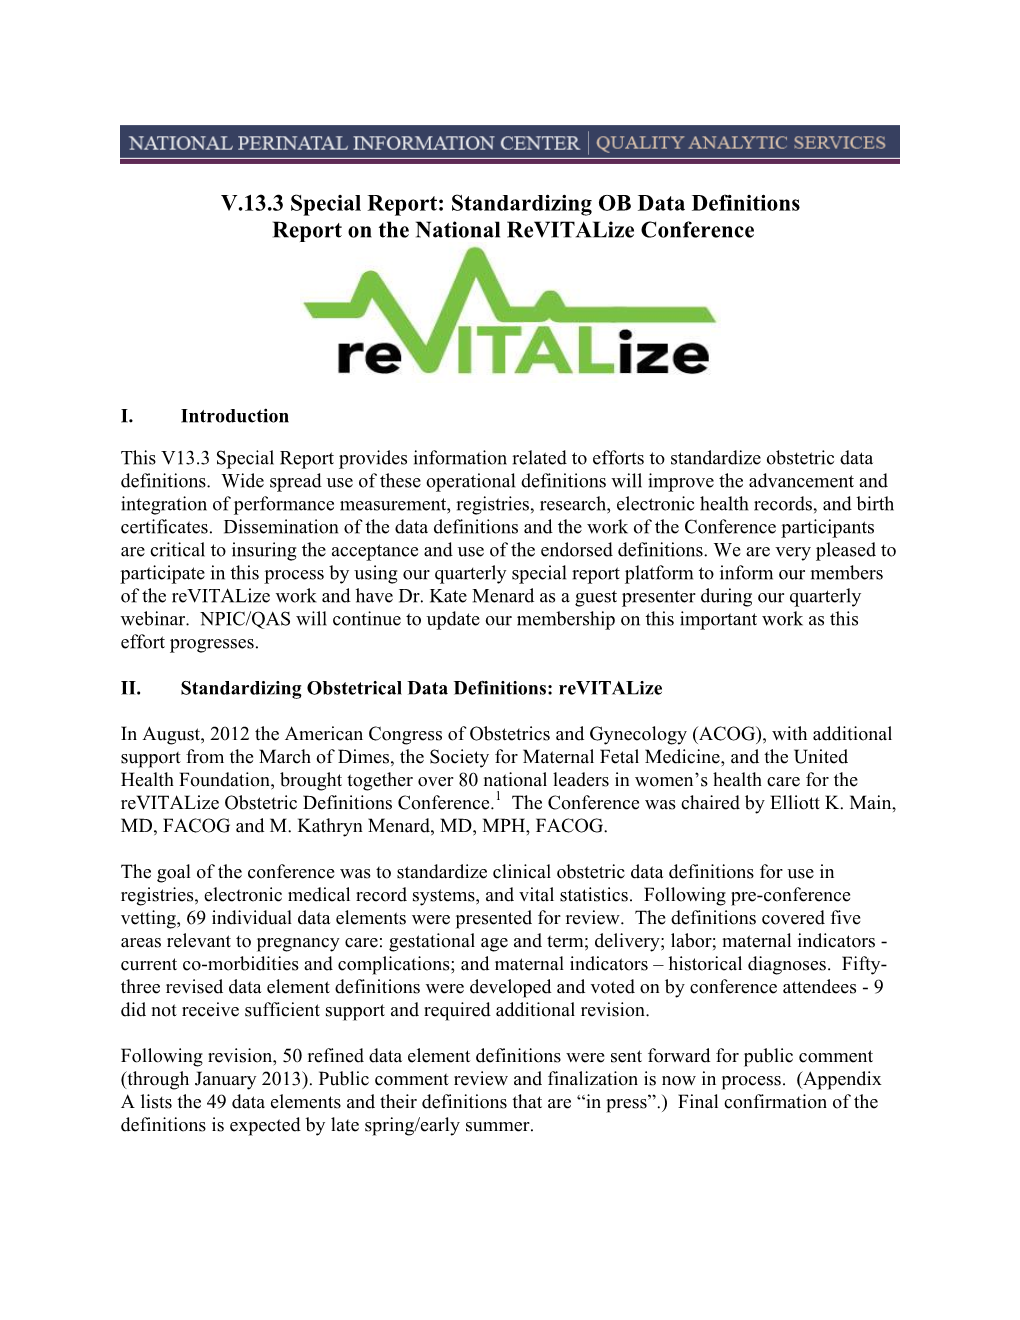 Standardizing OB Data Definitions Report on the National Revitalize Conference